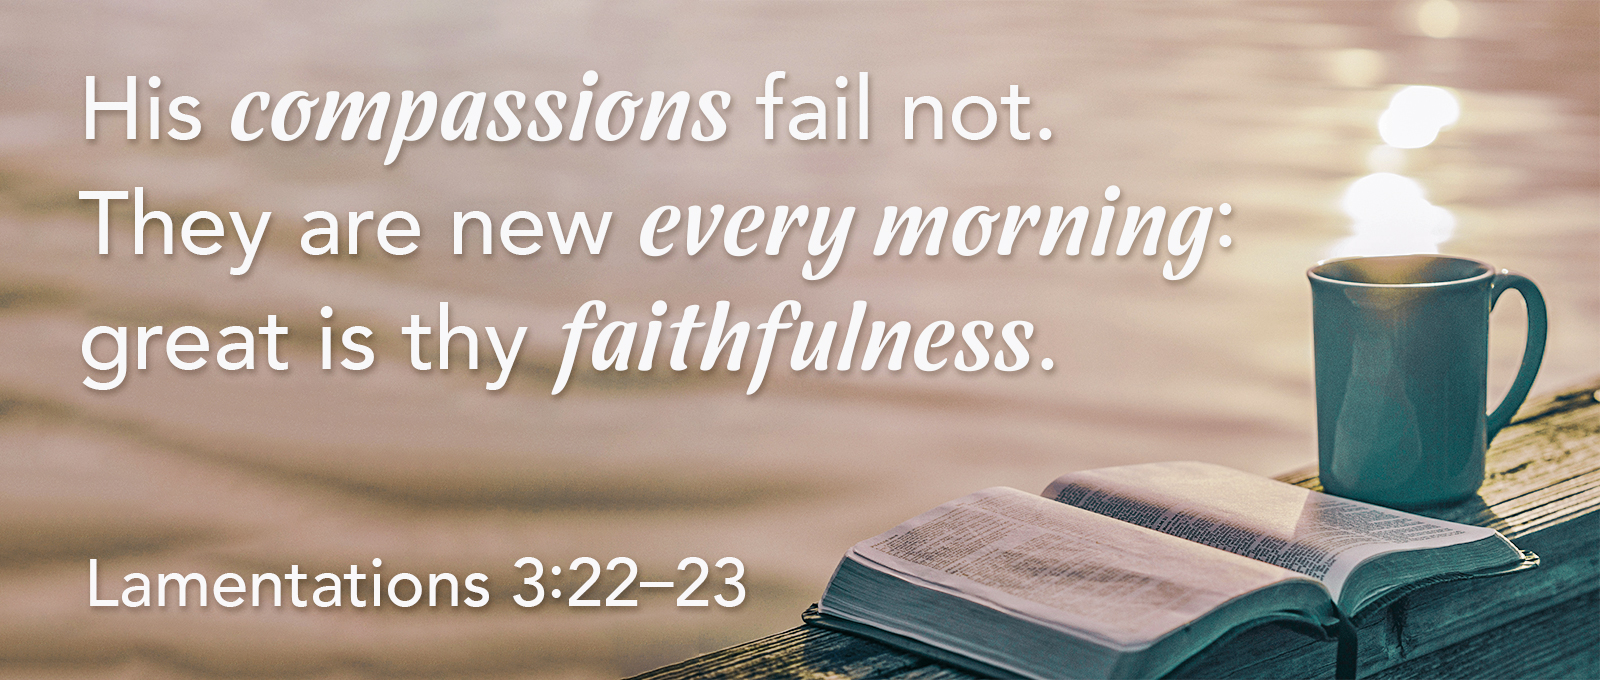 January verse slider - His compassions fail not. They are new every morning: great is thy faithfulness. Lamentations 3:22-23